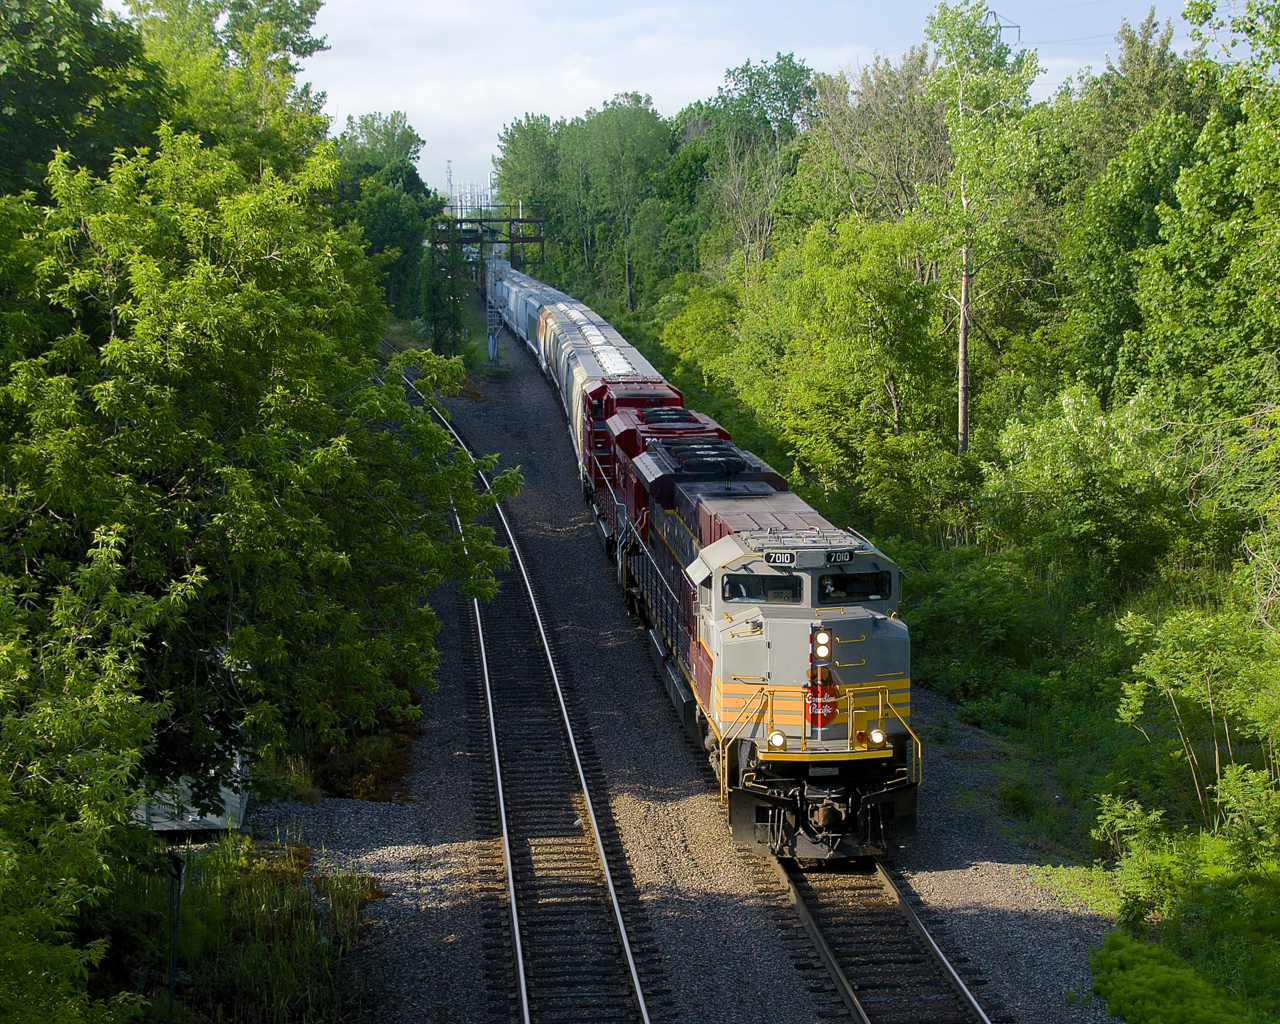 CP 253 with SD70ACU's CP 7010 and CP 7043 is passing North Jct, its voyage from Saratoga Springs nearly over.